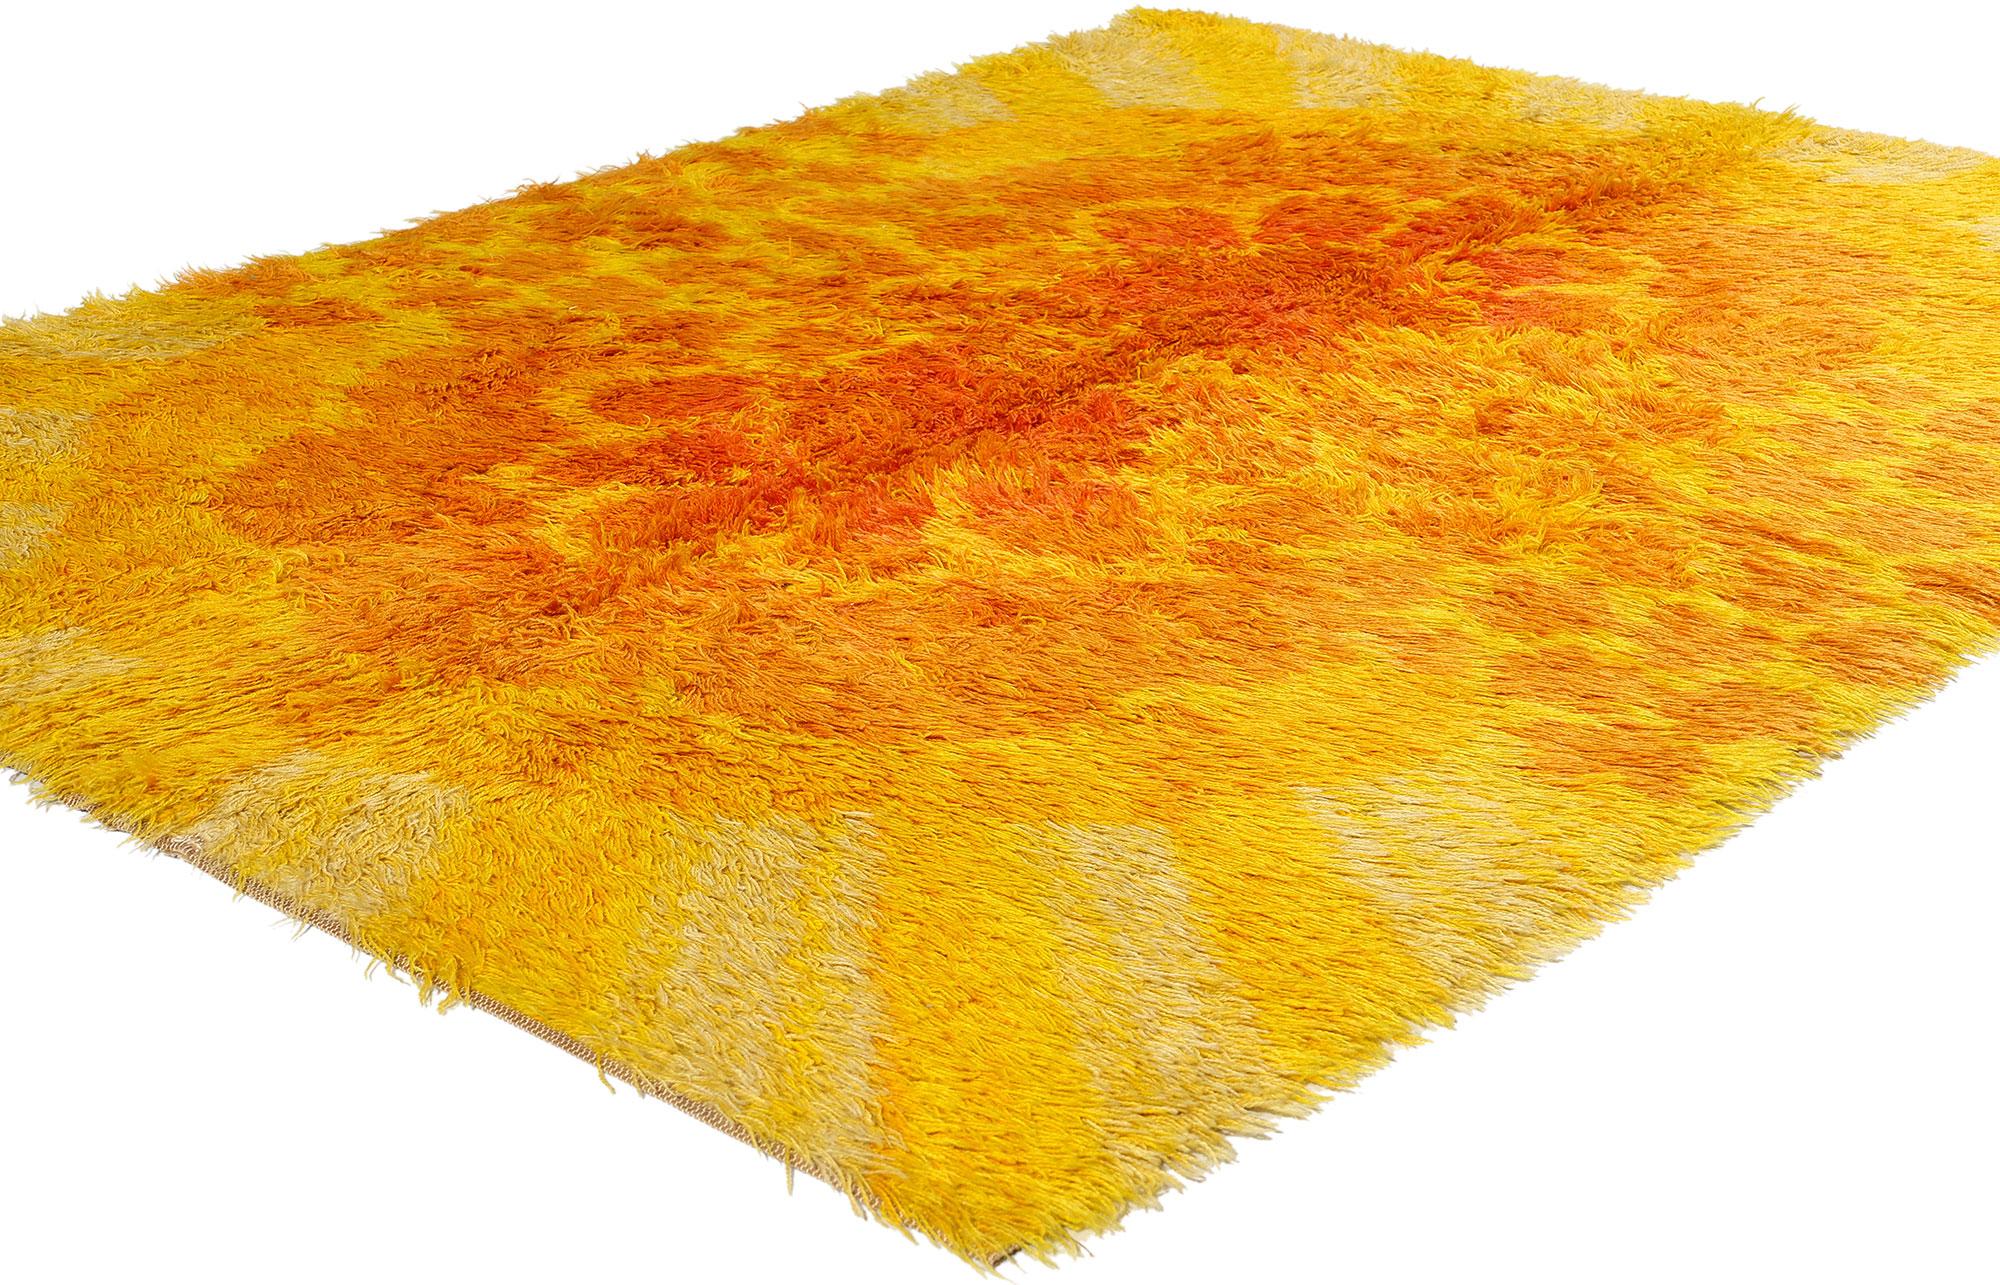 78271 Vintage Ege Taepper Danish Rya Rug, 04'06 x 06'04. Ege Taepper, a renowned Danish company, is celebrated for its high-quality carpets and distinctive rya rugs featuring bold sunburst designs. These designs, characterized by vibrant yellows and